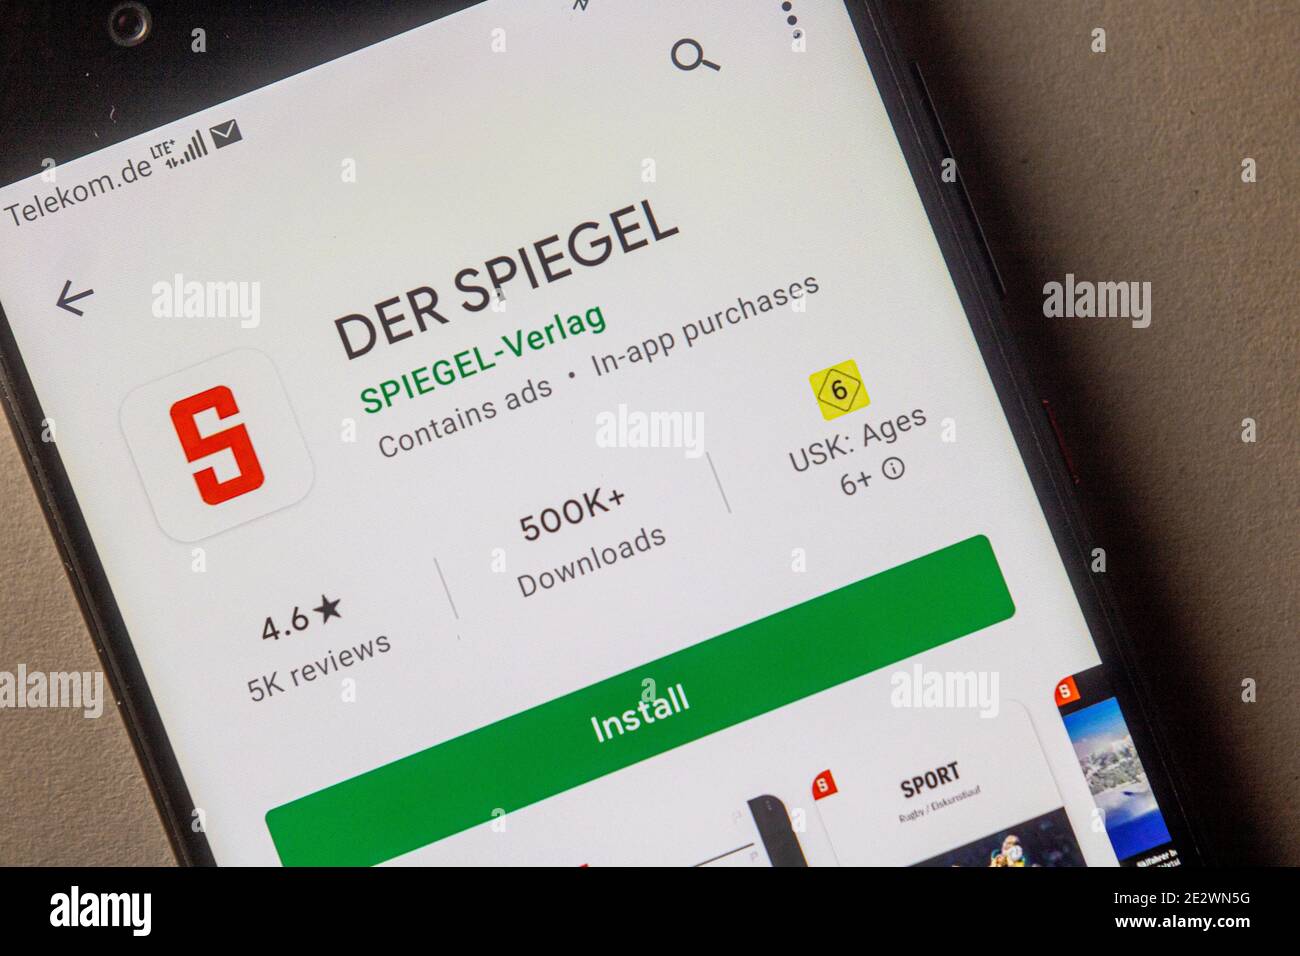 Neckargemuend, Germany: January 15, 2021: app icon of of the German news magazine "Der Spiegel" (the mirror) in the google app store on phone screen t Stock Photo